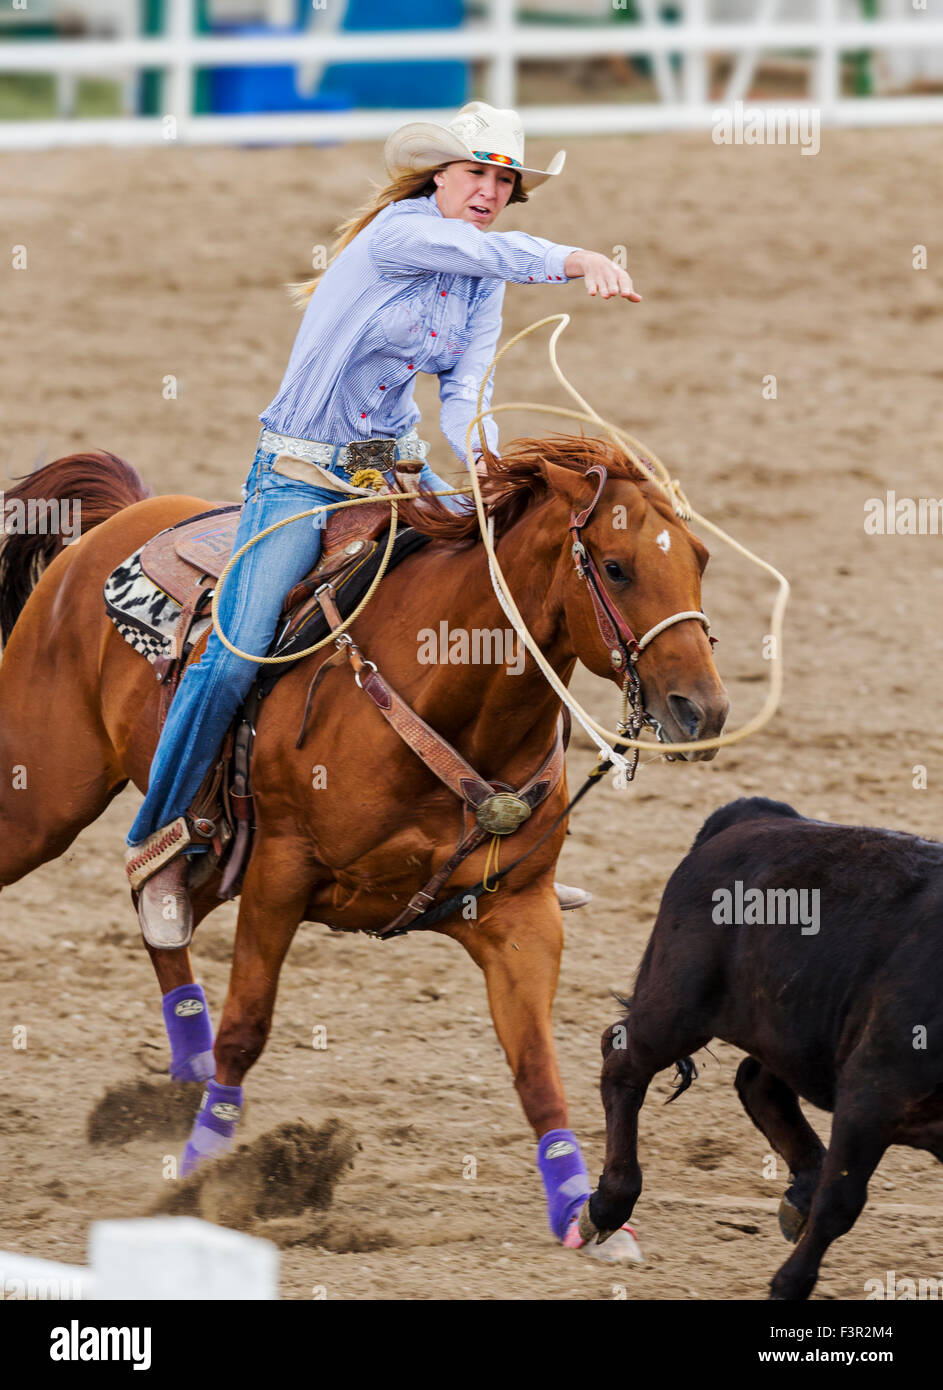 Rodeo cowgirl on horseback competing in calf roping, or tie-down roping event, Chaffee County Fair & Rodeo, Salida, Colorado USA Stock Photo